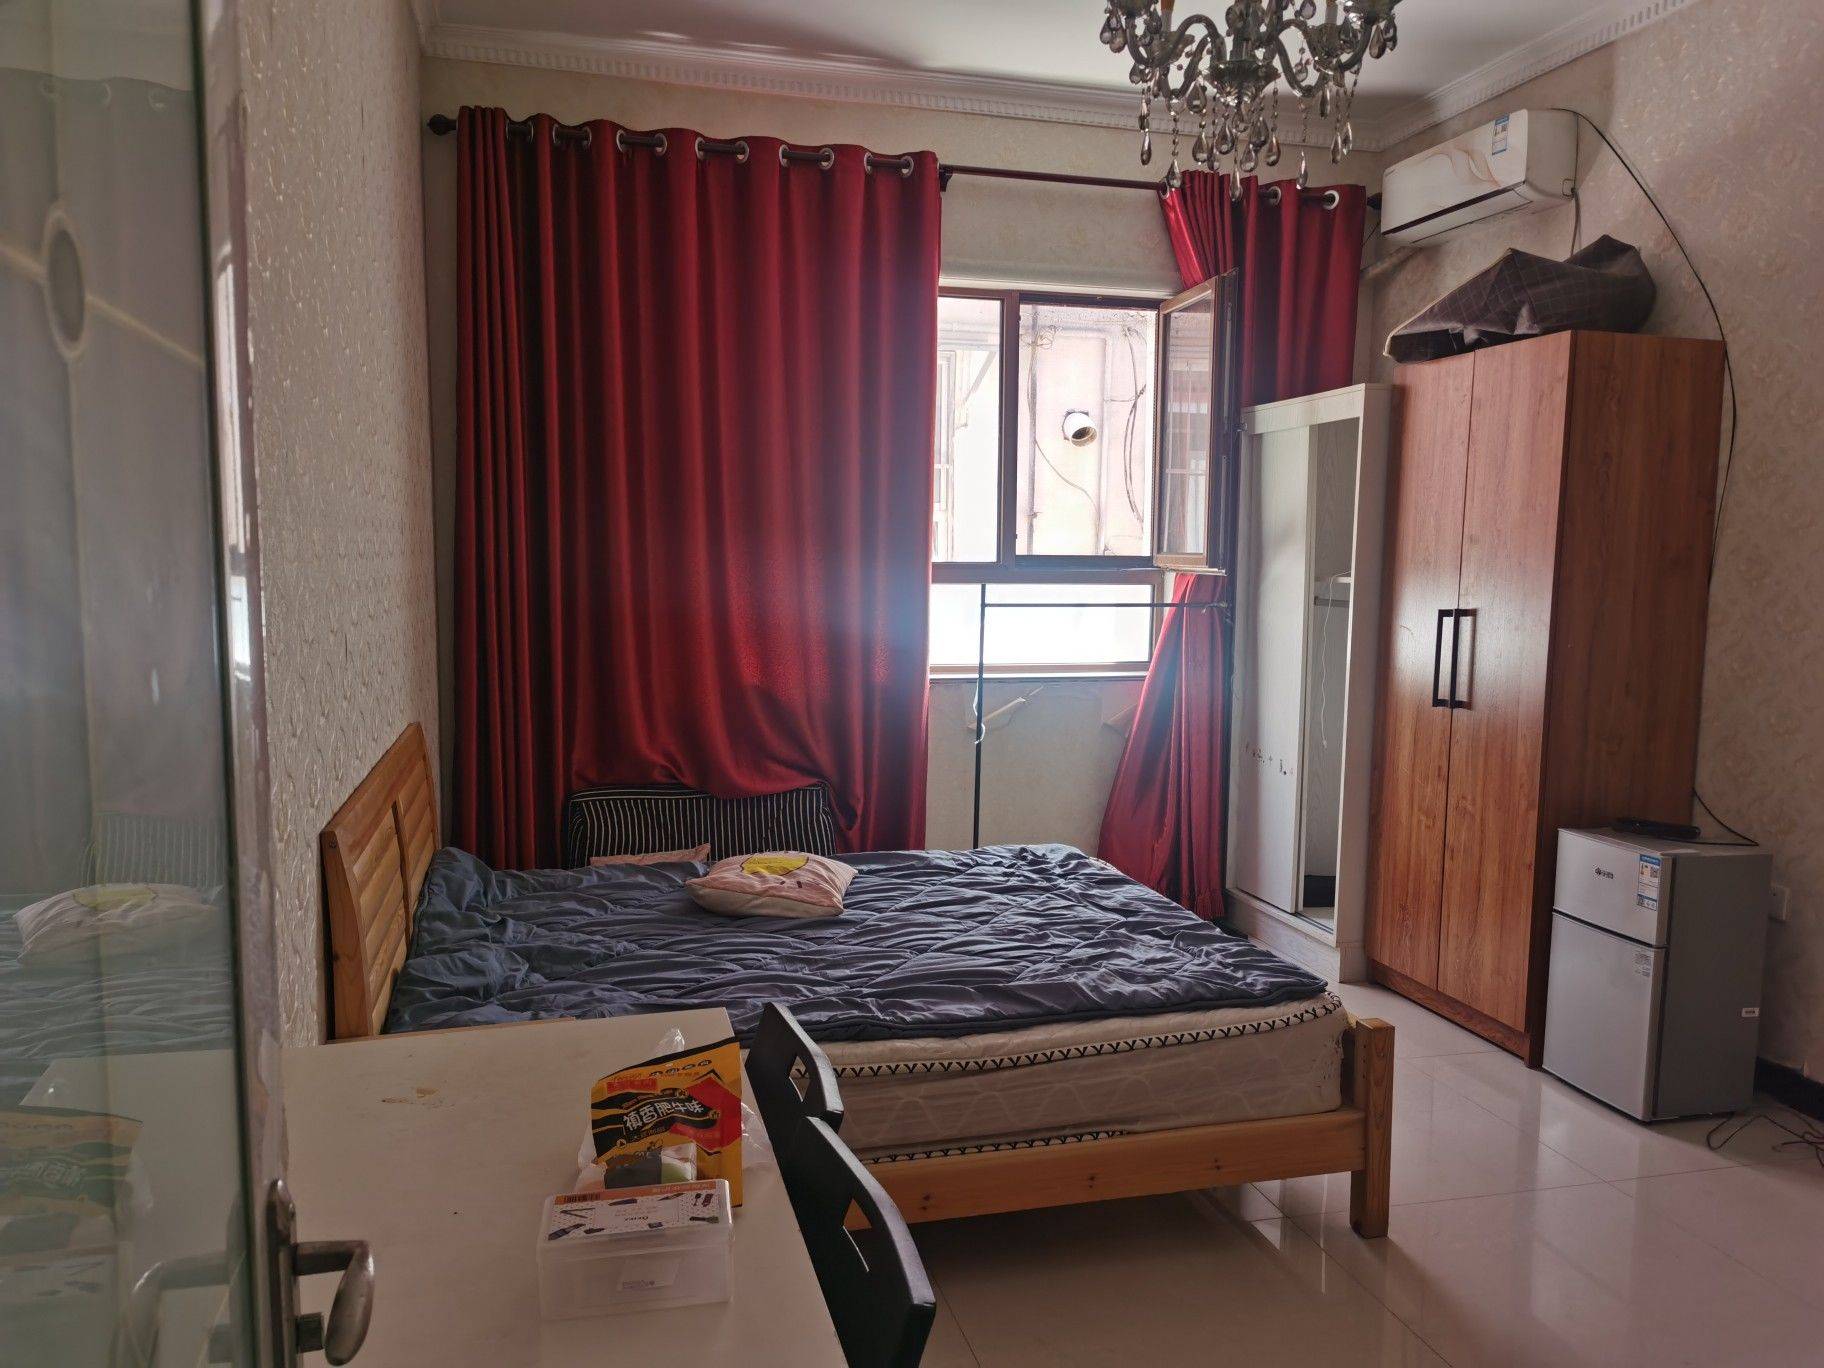 Beijing-Chaoyang-Cozy Home,Clean&Comfy,No Gender Limit,Hustle & Bustle,Chilled